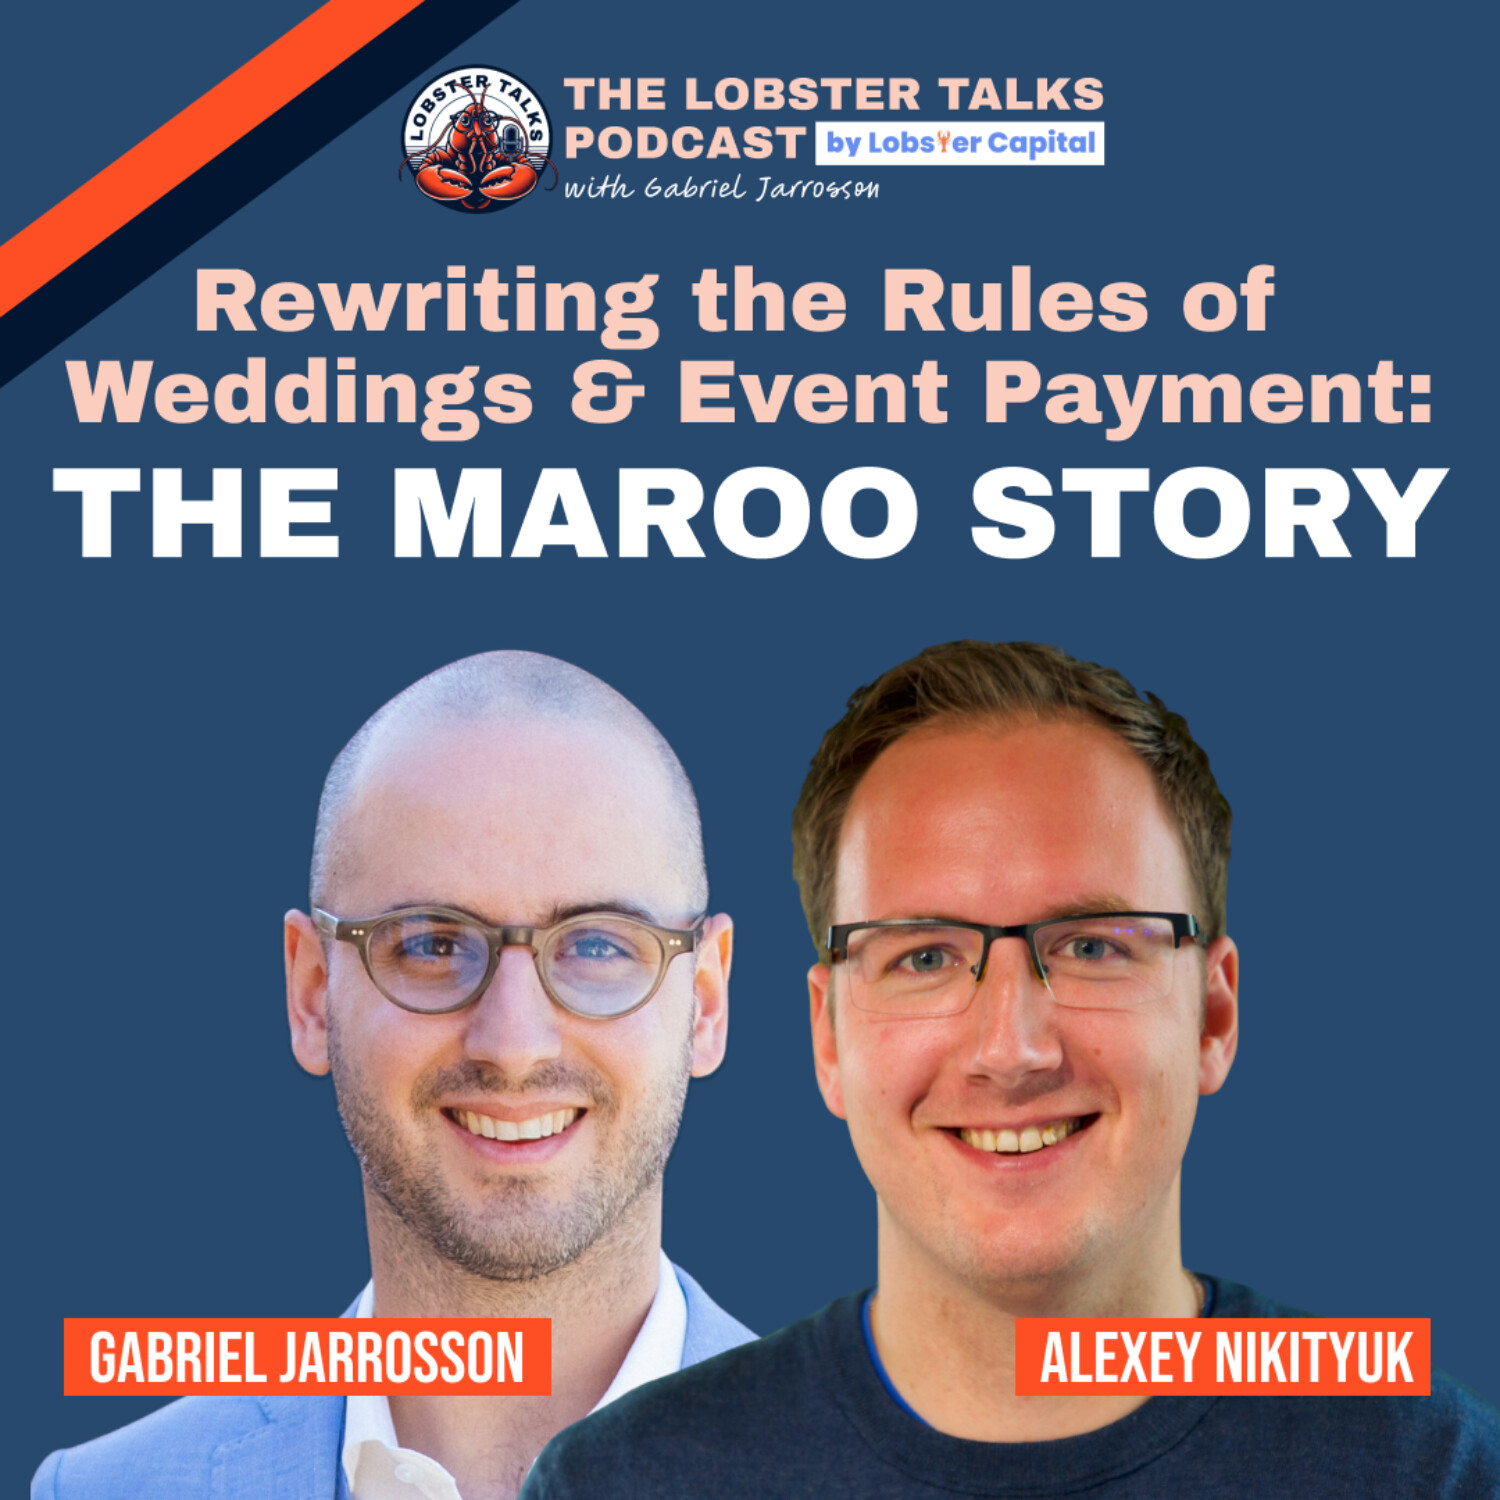 Rewriting the Rules of Weddings & Event Payment - The Maroo Story with Alex Nikityuk | Episode 2